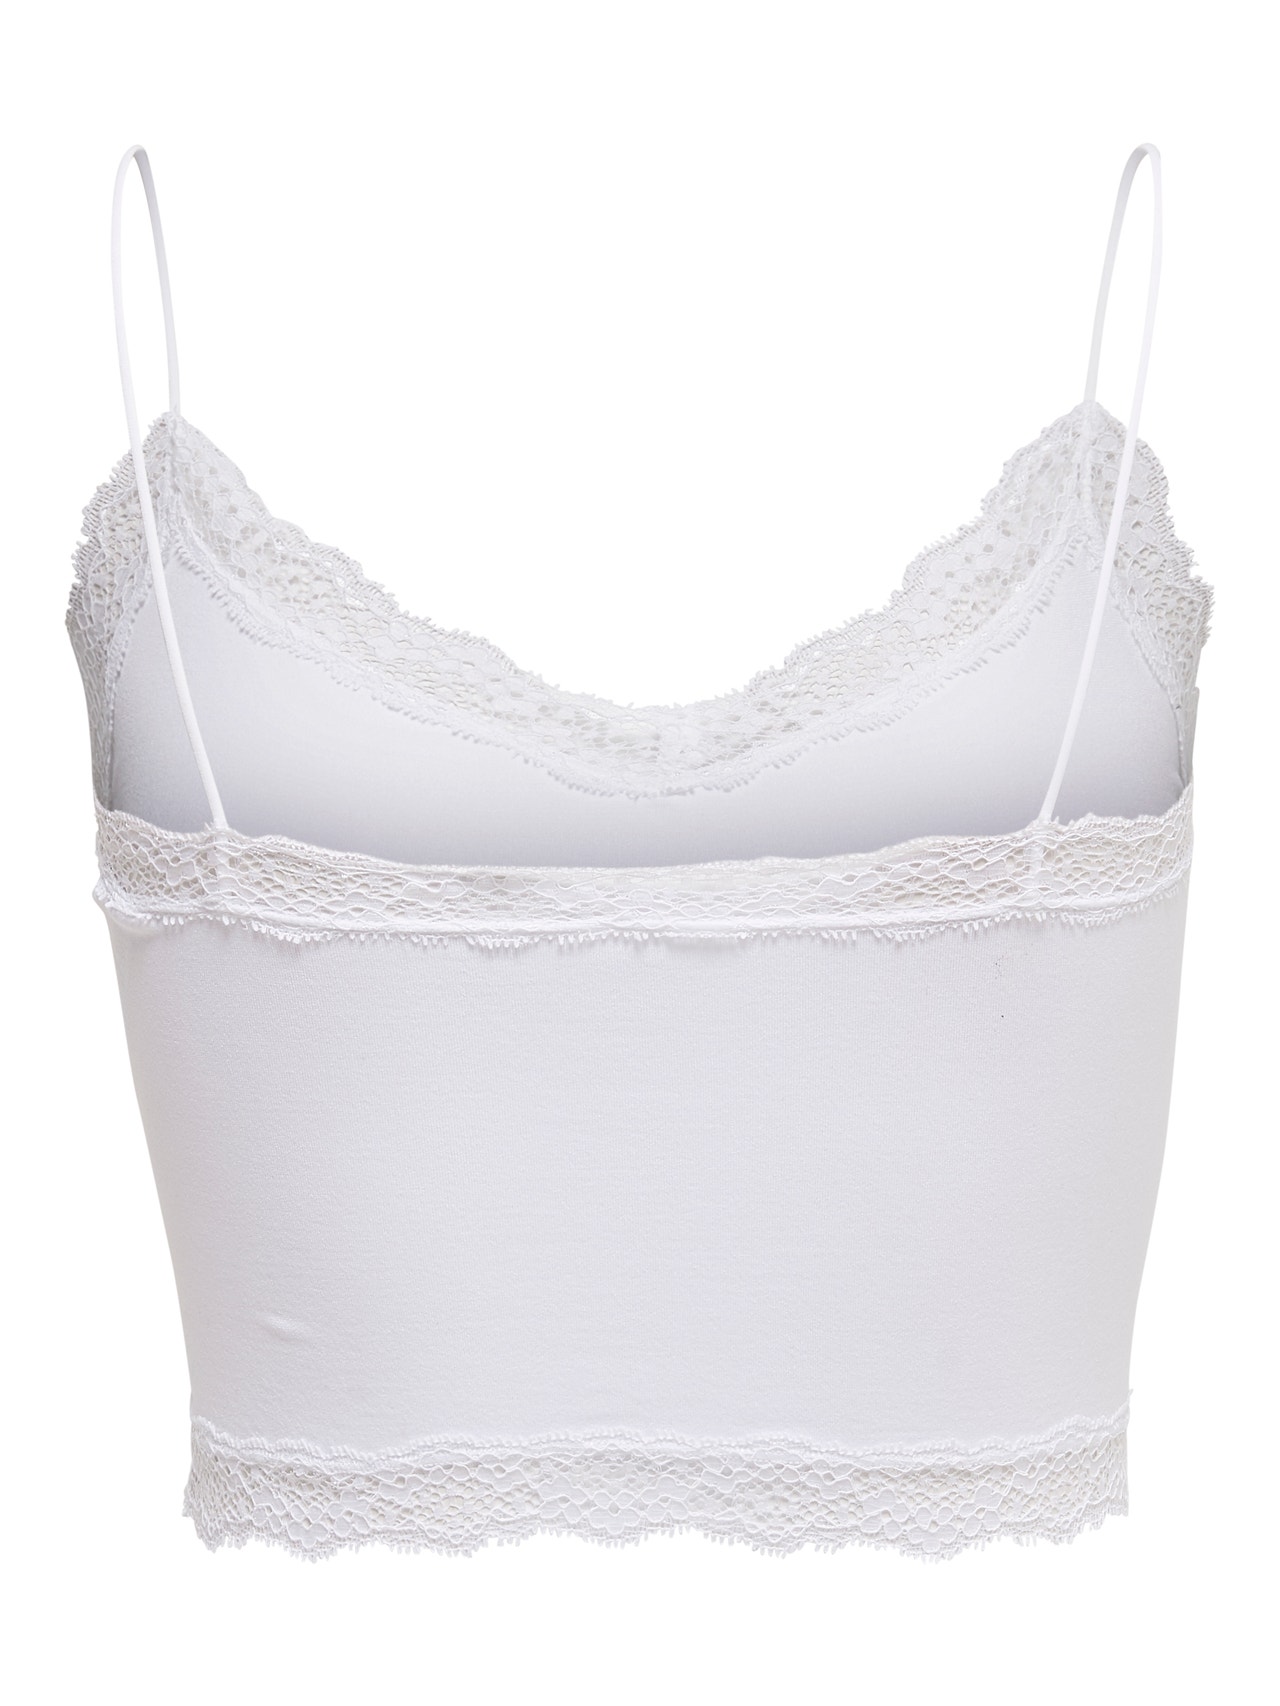 ONLY Cropped top with lace edges -Bright White - 15190175